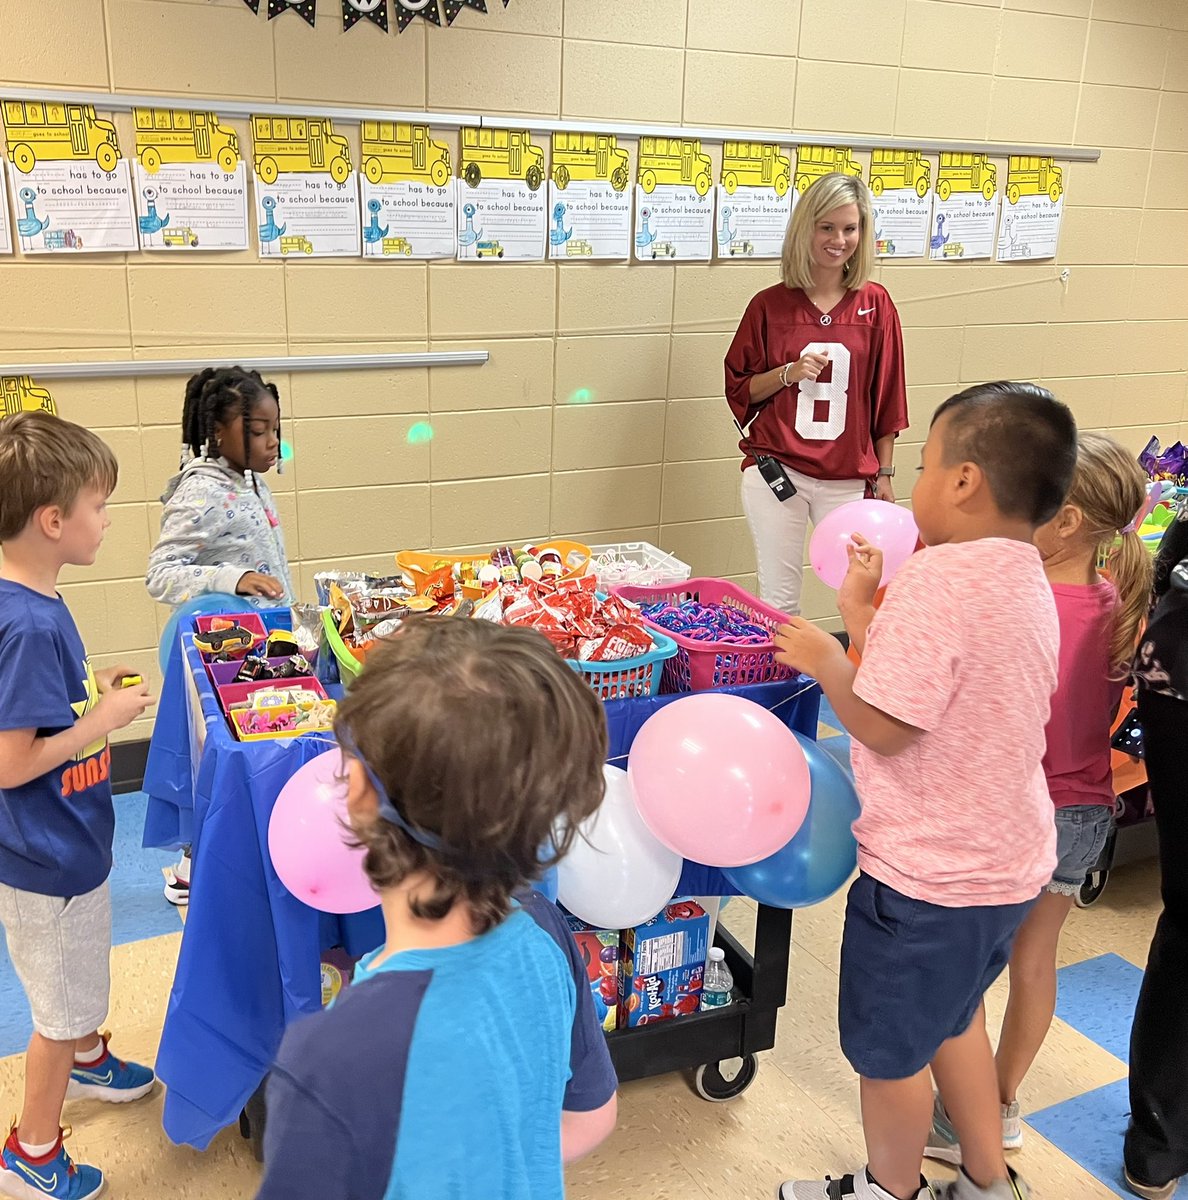 The Wildcat Wagon full of prizes, balloons, music, and lights made an appearance for those kiddos who earned their 20 dojo points this month! Thank you to these fabulous assistant principals for making school such a happy place! @FelishaJReid @NicoleDonnell2 @FultondaleElem